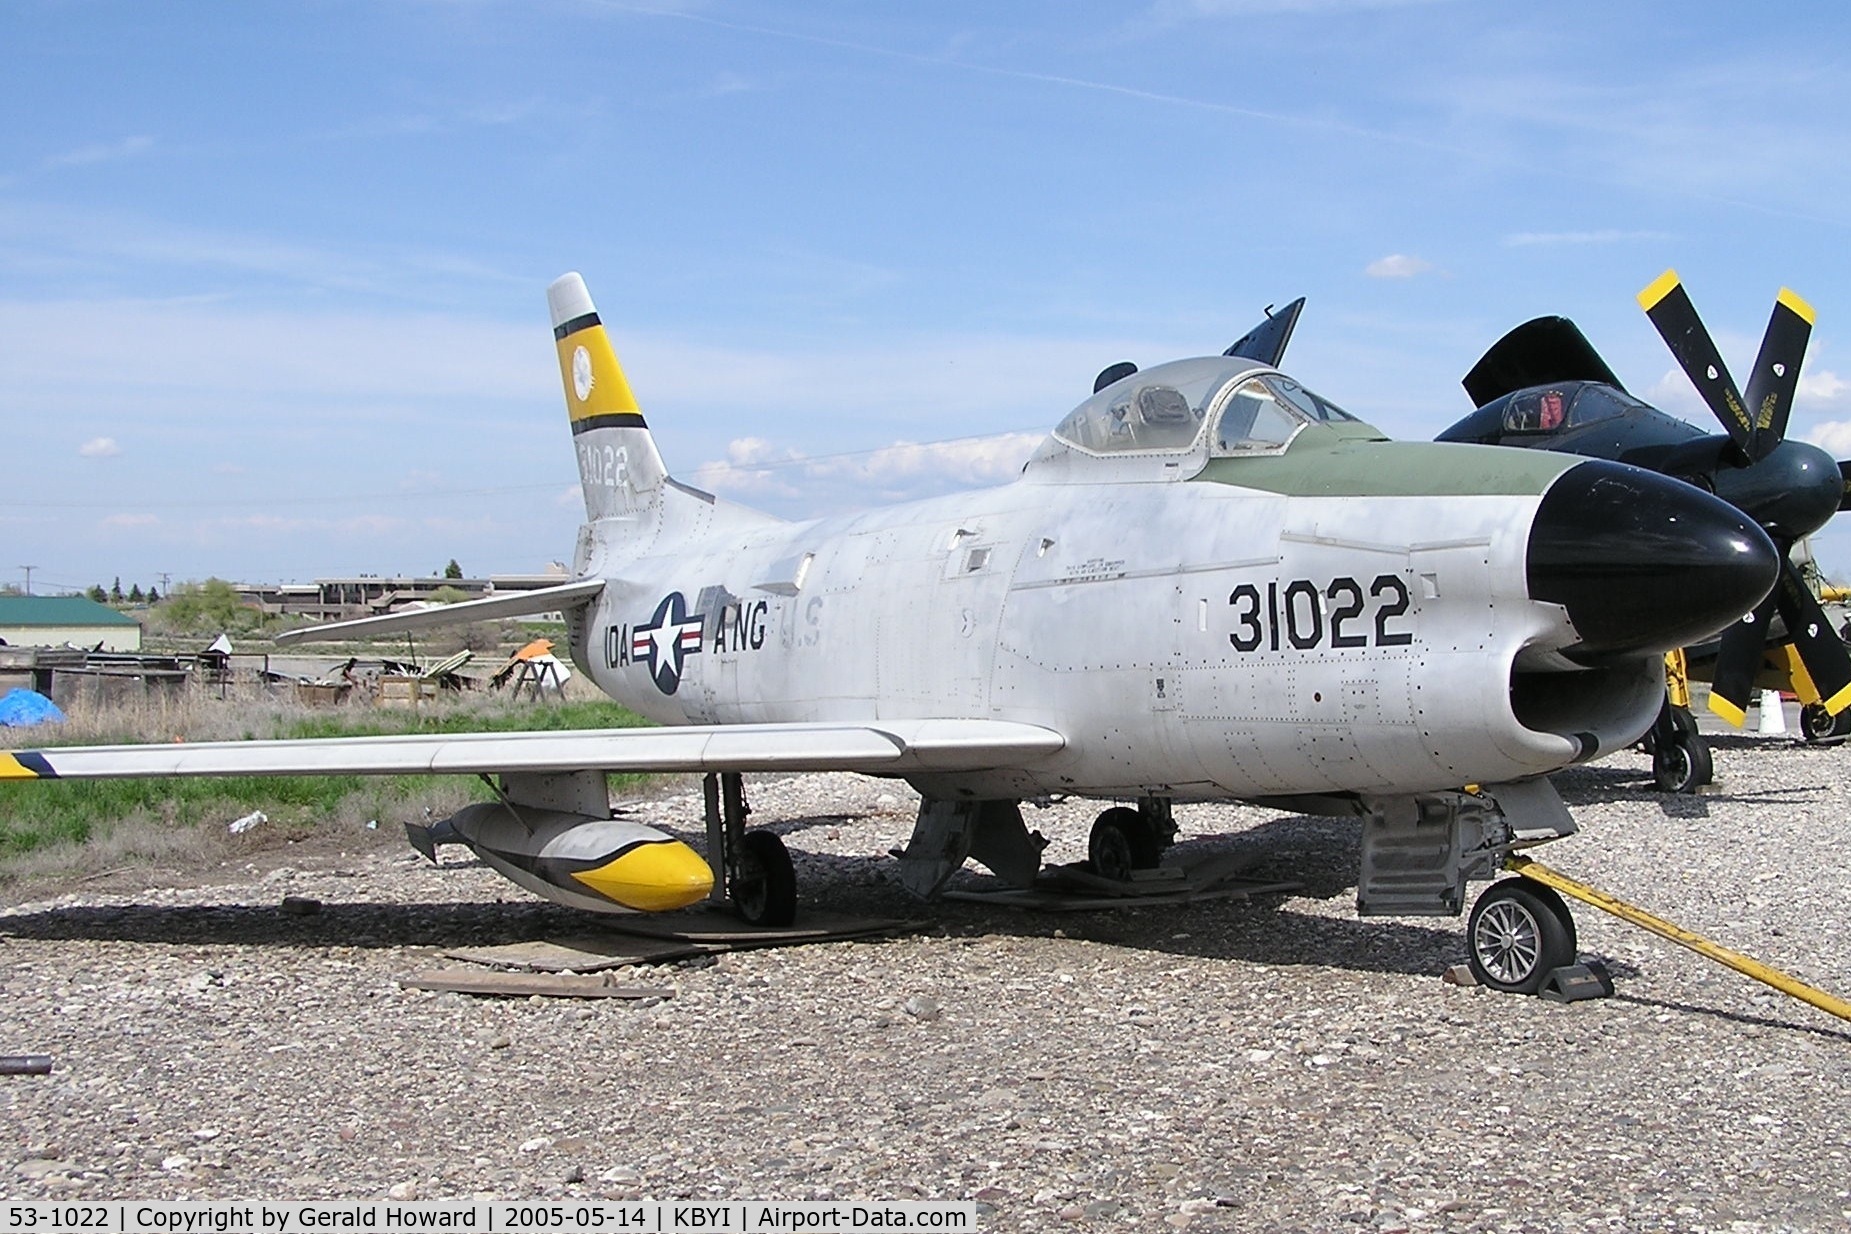 53-1022, 1953 North American F-86L Sabre C/N 301-466, Collecting dust at BYI airport. Flew with the 190th Fighter Interceptor Squadron, Idaho Air Guard during the 1950s.